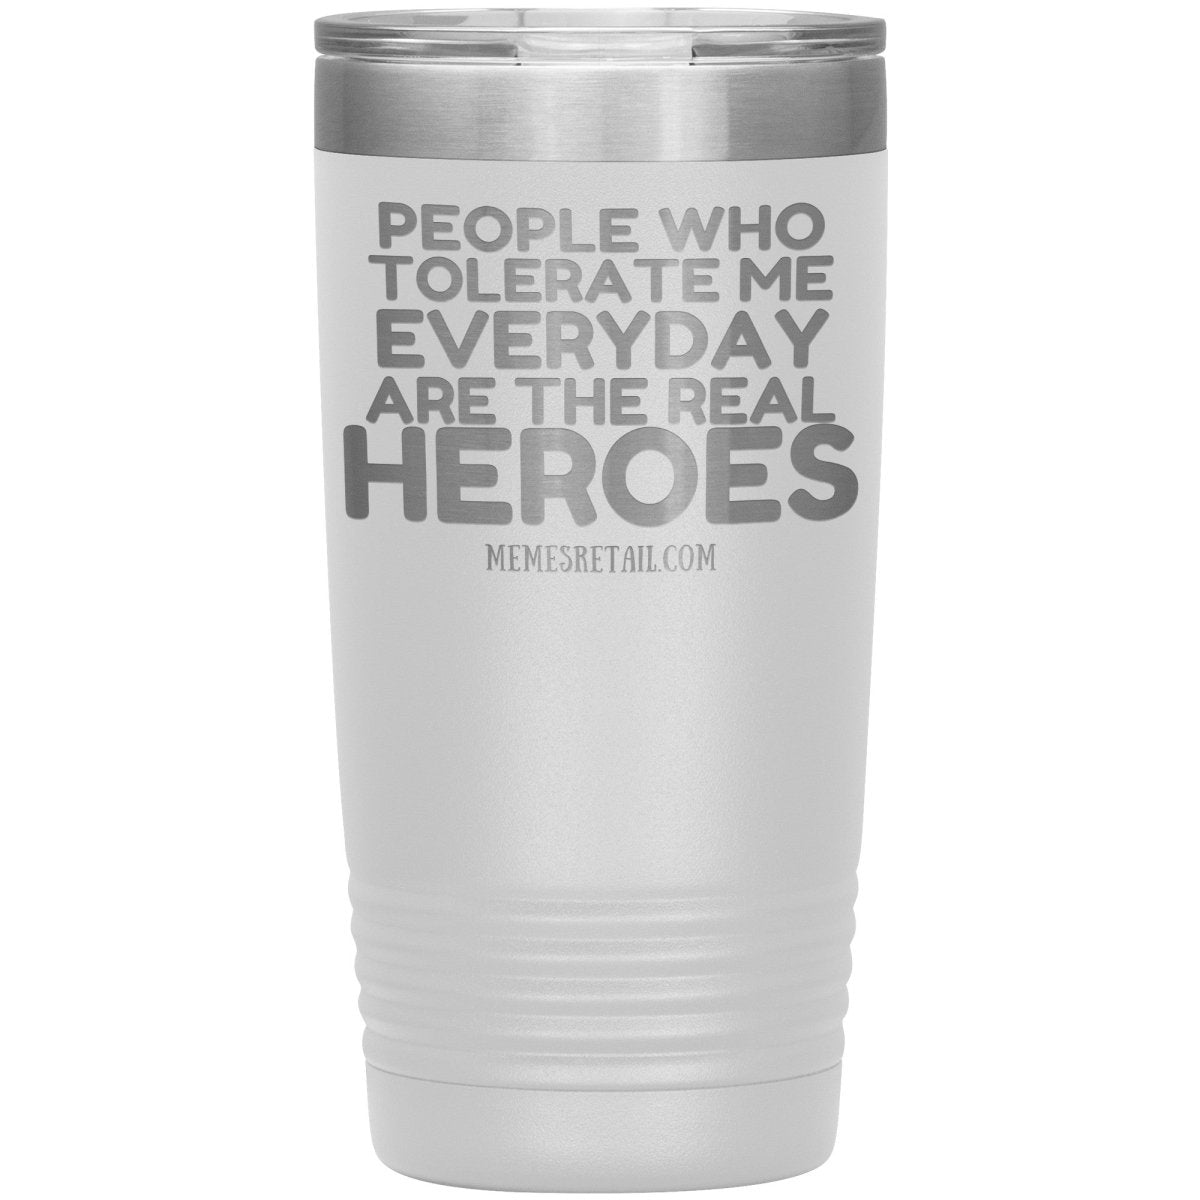 People Who Tolerate Me Everyday Are The Real Heroes Tumblers, 20oz Insulated Tumbler / White - MemesRetail.com